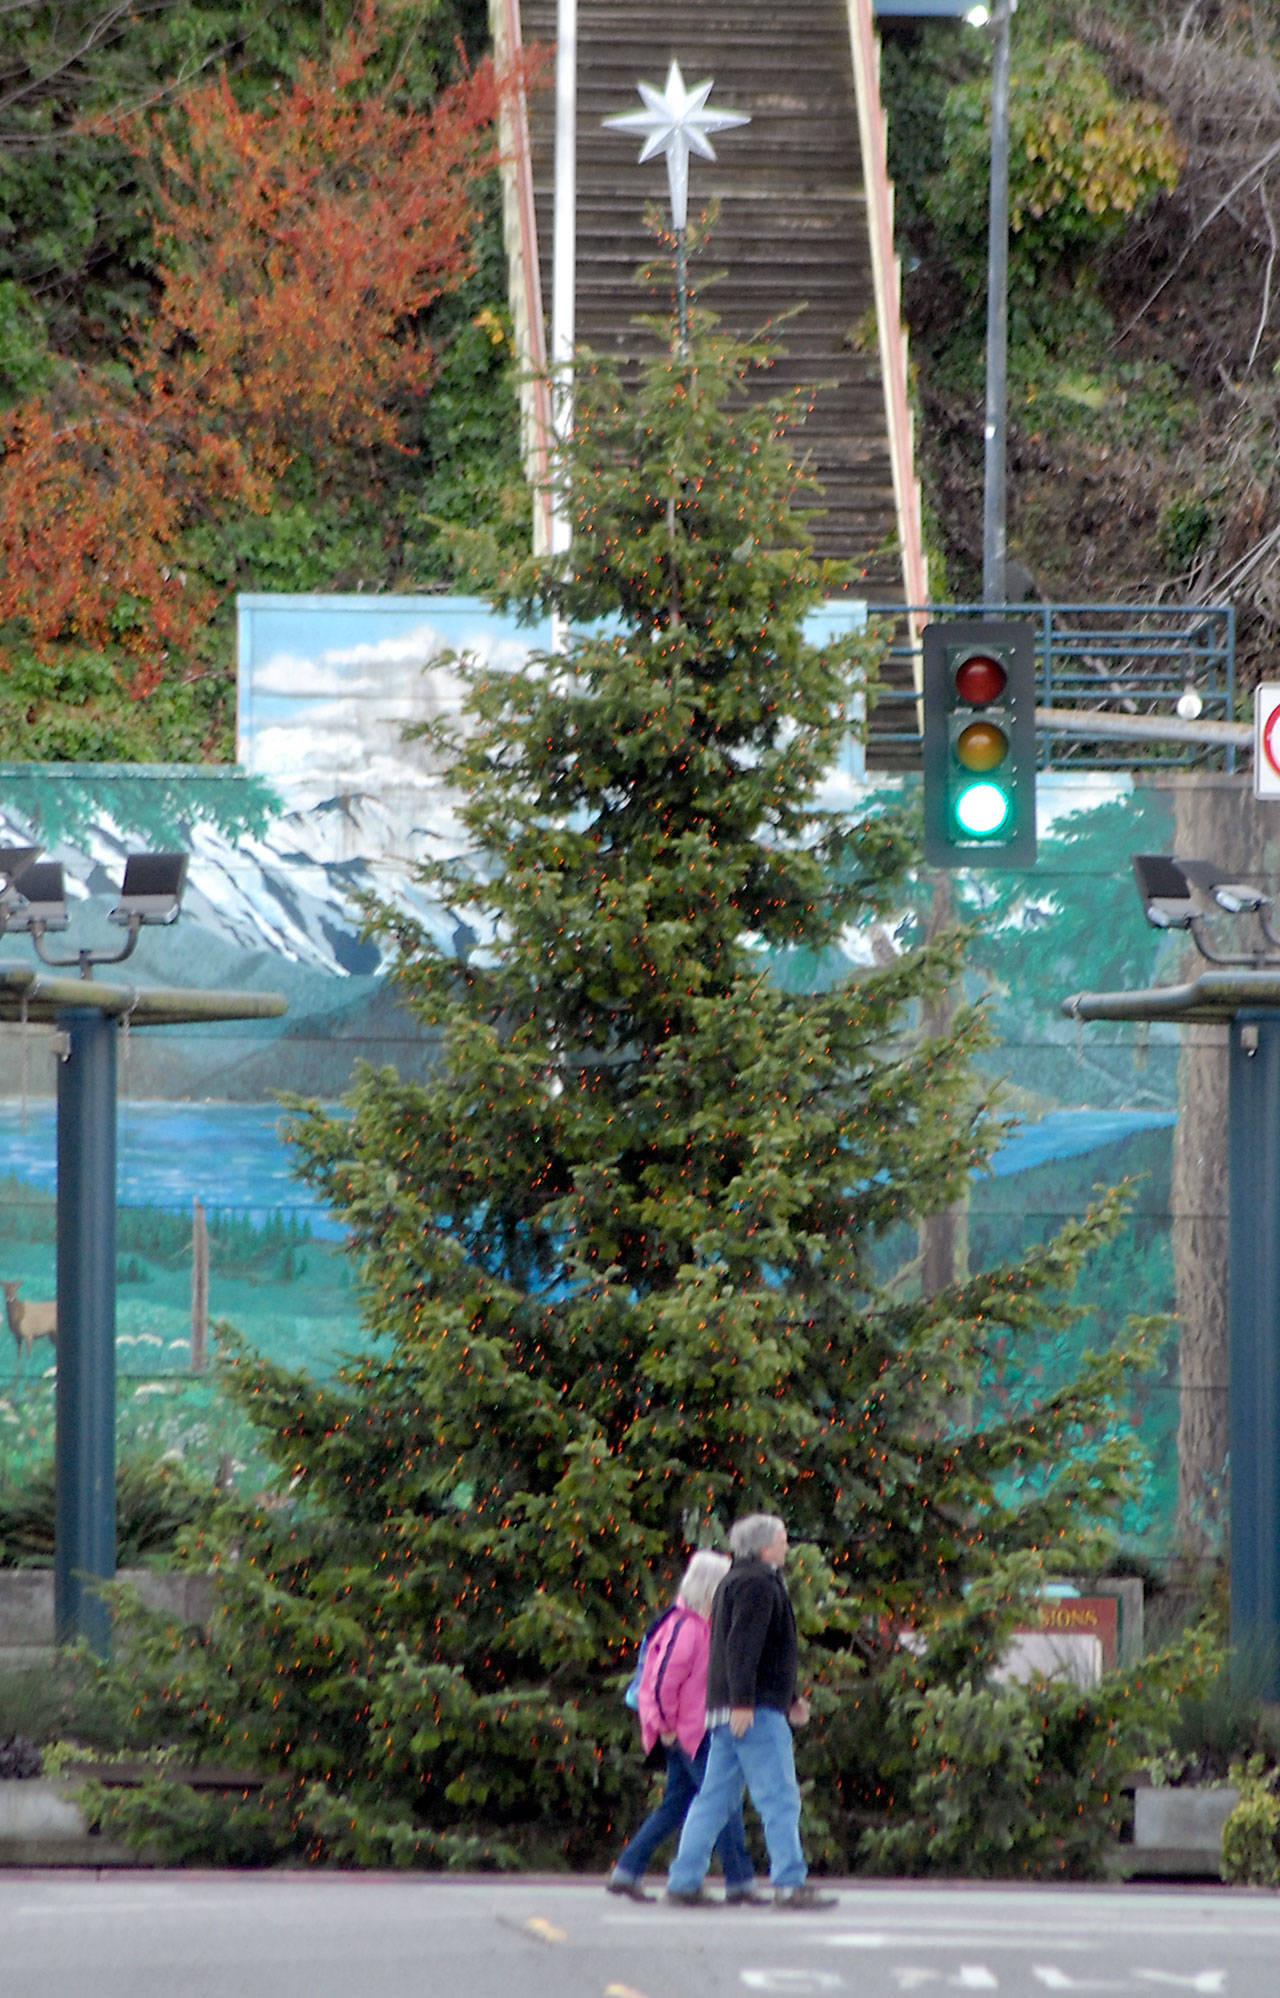 The Christmas tree at the Conrad Dyar Fountain in downtown Port Angeles is scheduled to be lit Saturday evening. (Keith Thorpe/Peninsula Daily News)